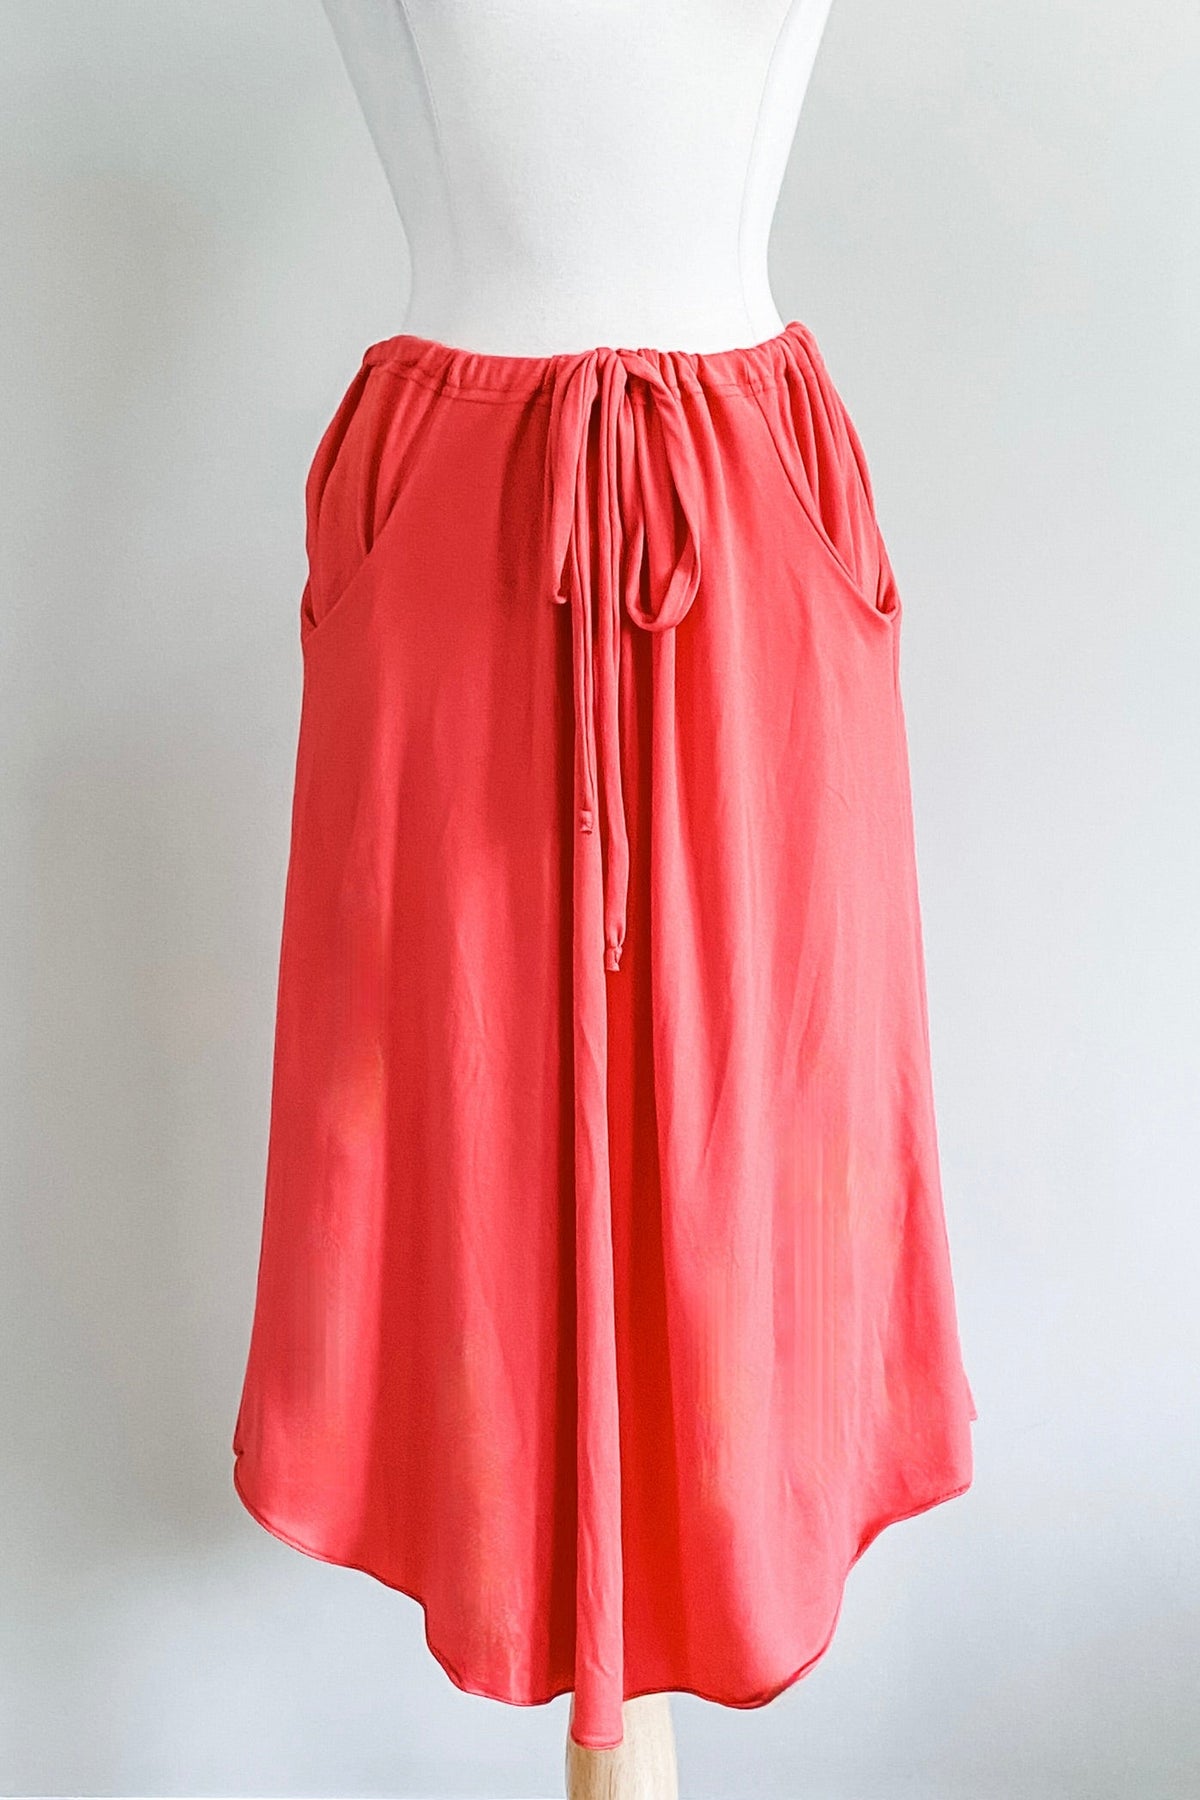 Diane Kroe Evermore Tunic (Coral) - Warm Weather Capsule Collection